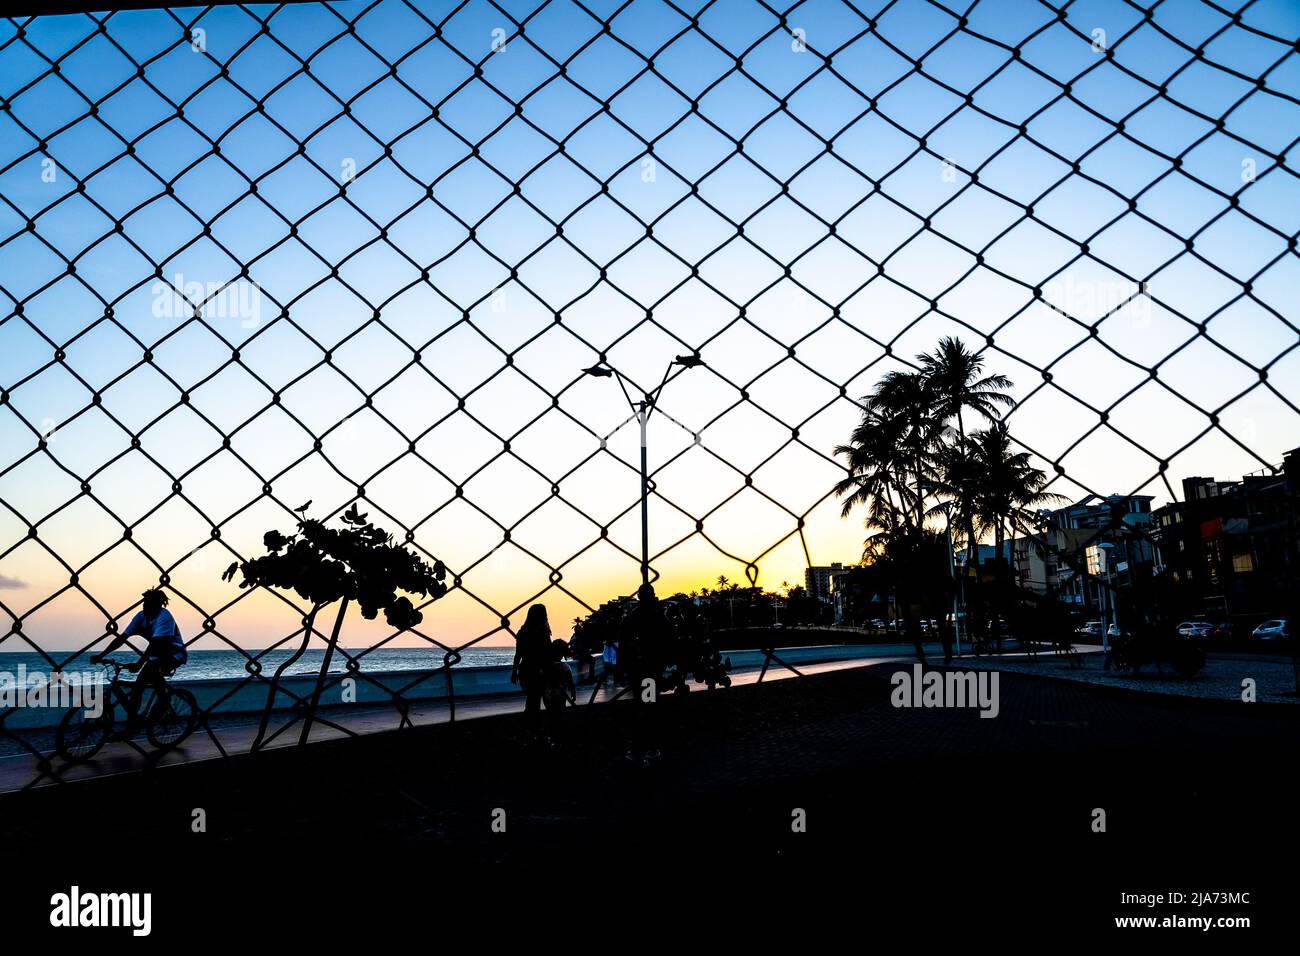 Grid silhouette, wire; trees and pole against yellow and blue sunset. Salvador, Bahia, Brazil. Stock Photo